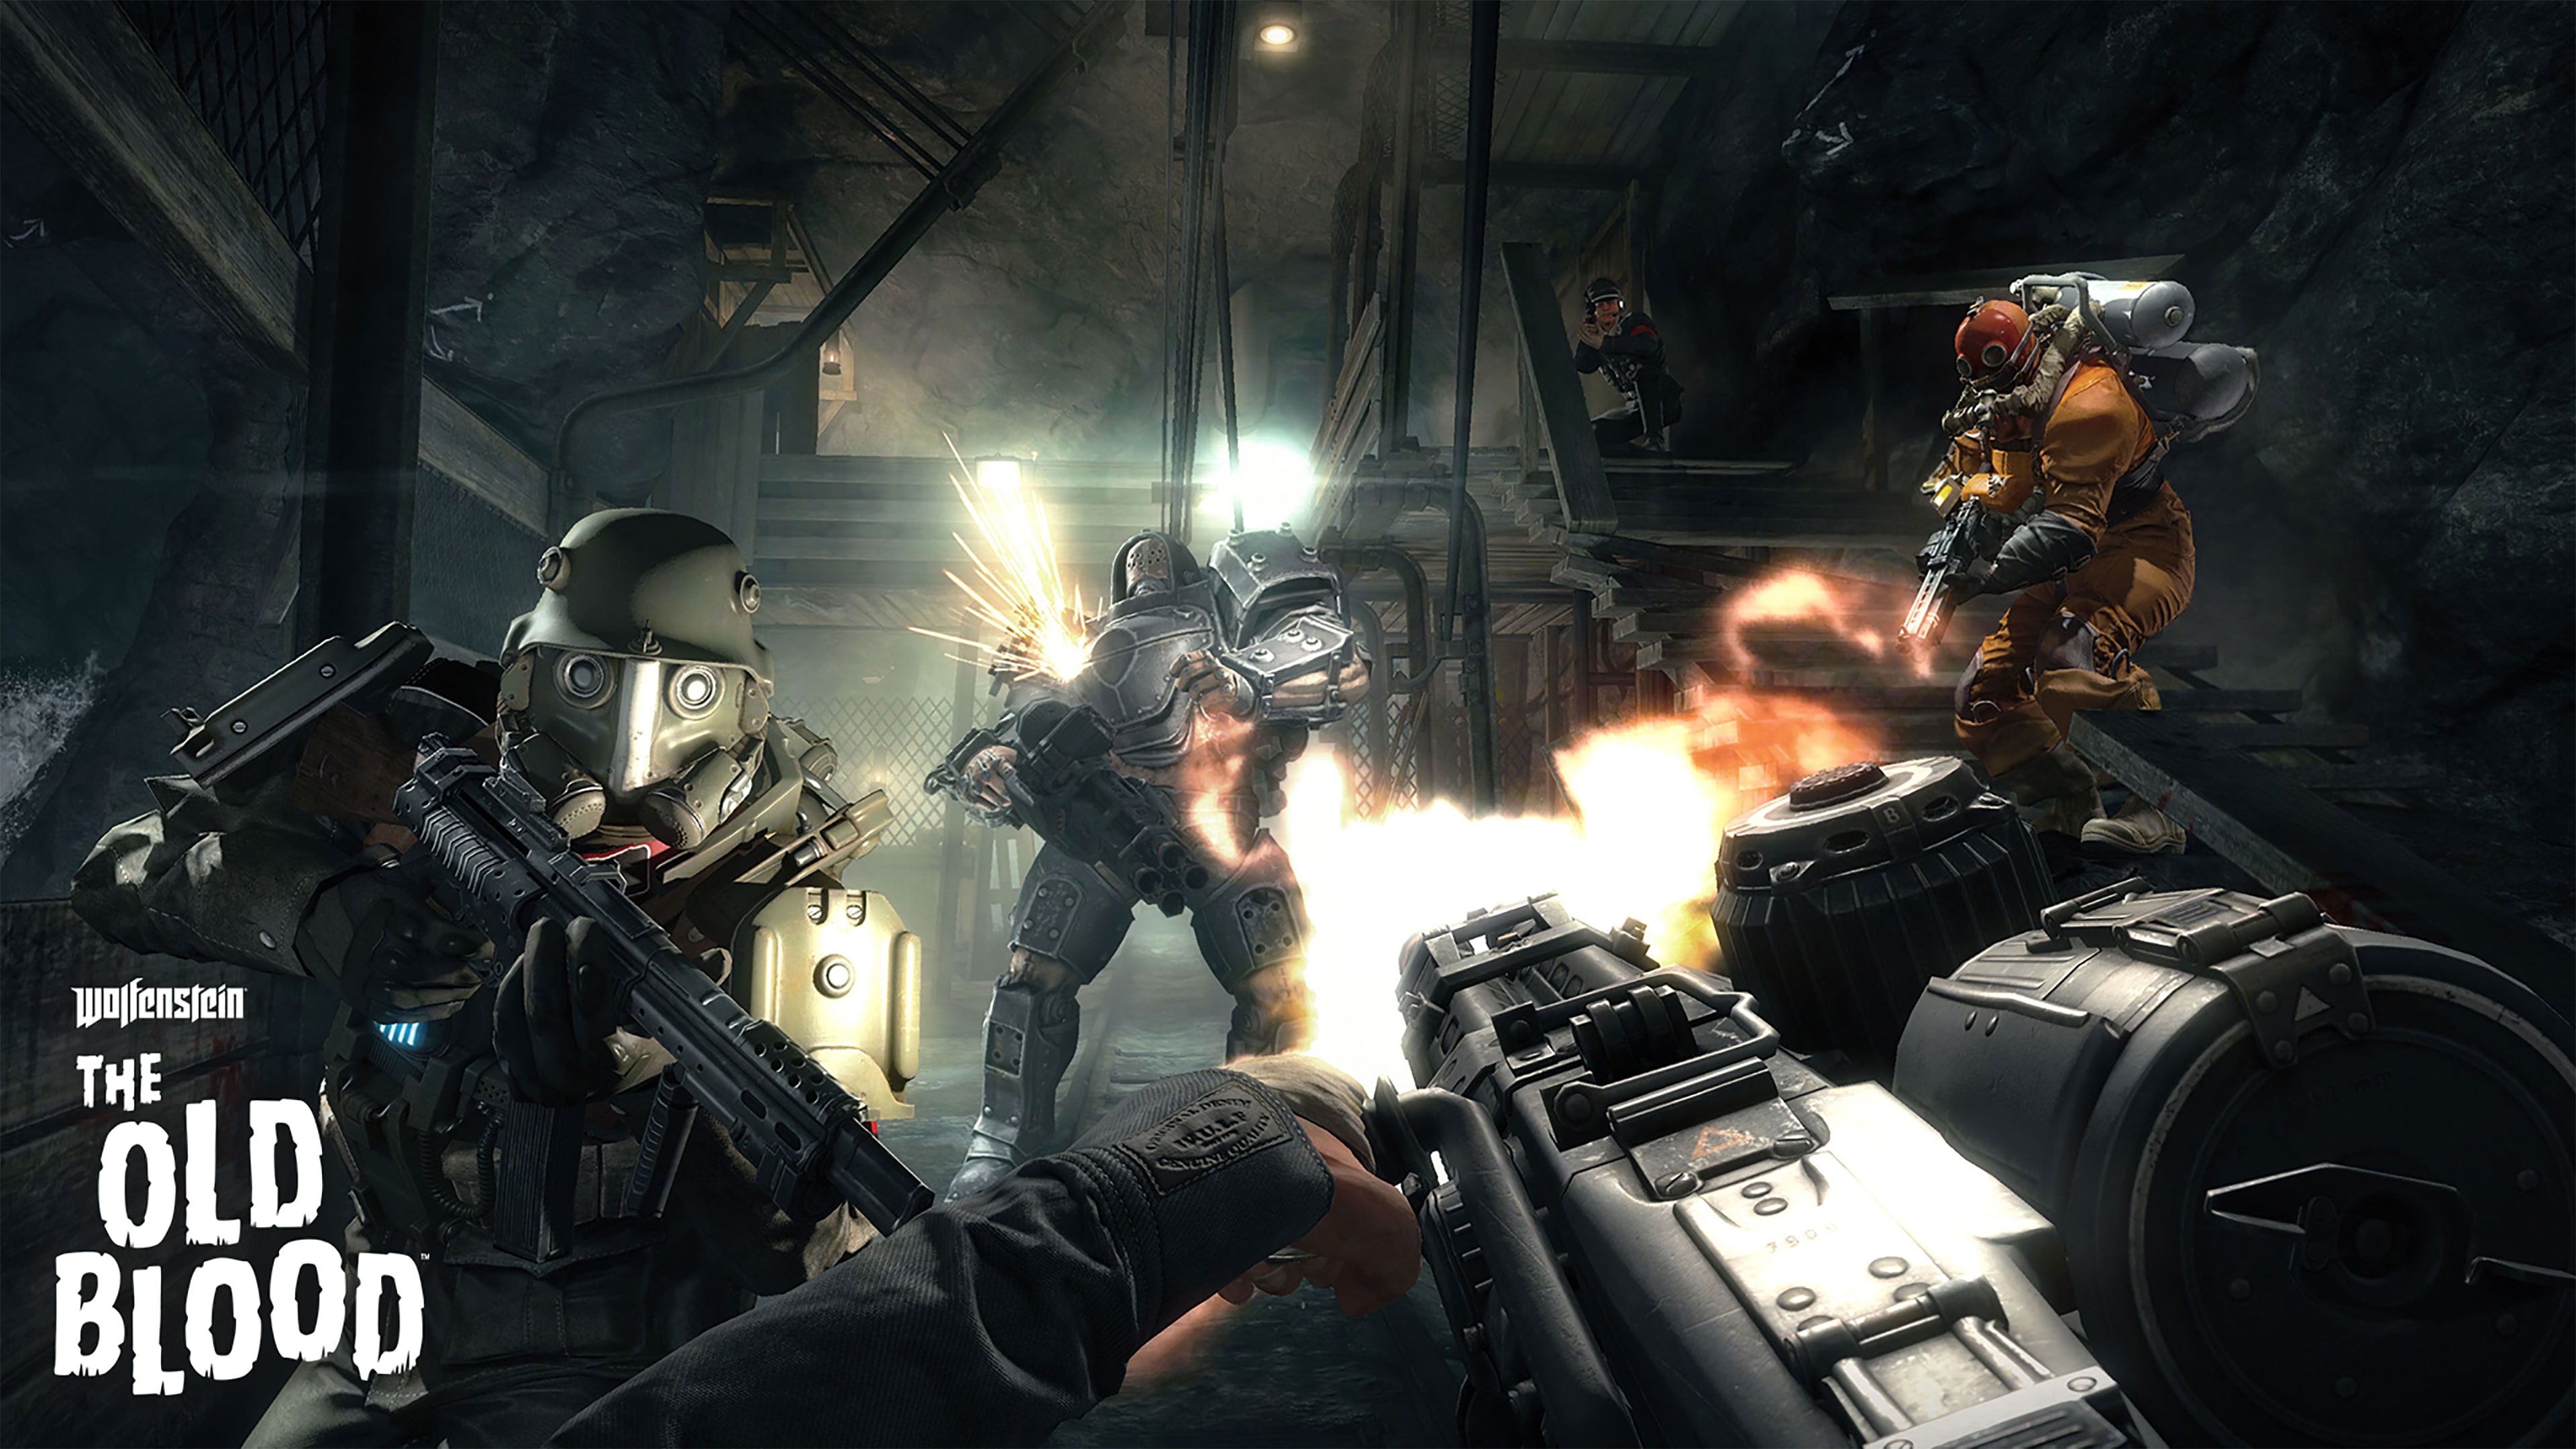 Wolfenstein: Alt History Collection Trophy Guides and PSN Price History